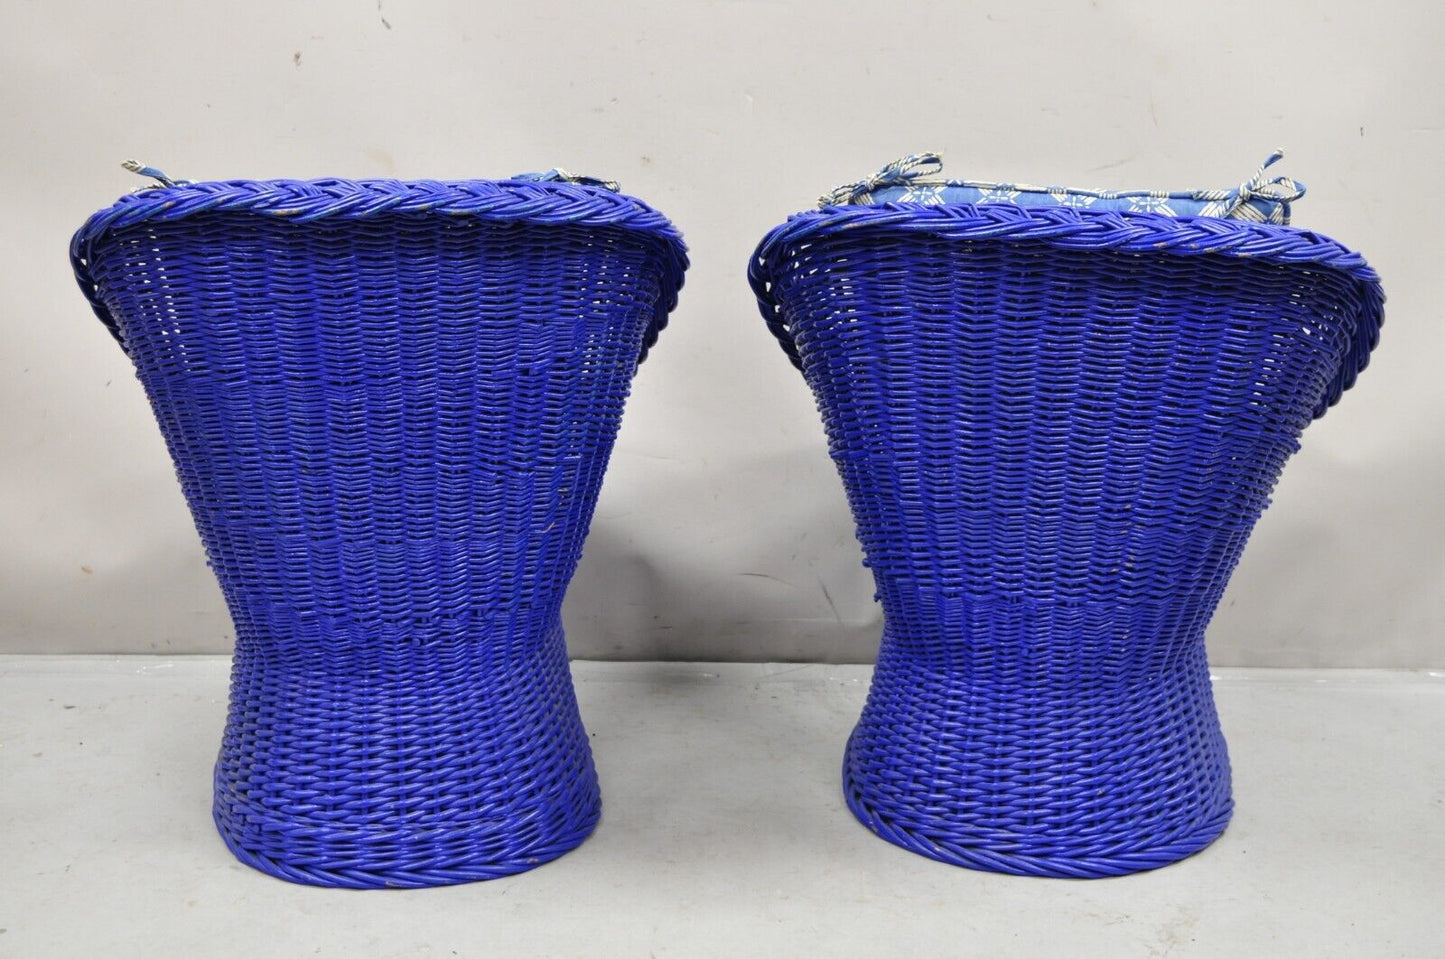 Vintage Mid Century Modern Blue Painted Wicker Rattan Pod Club Chairs - a Pair